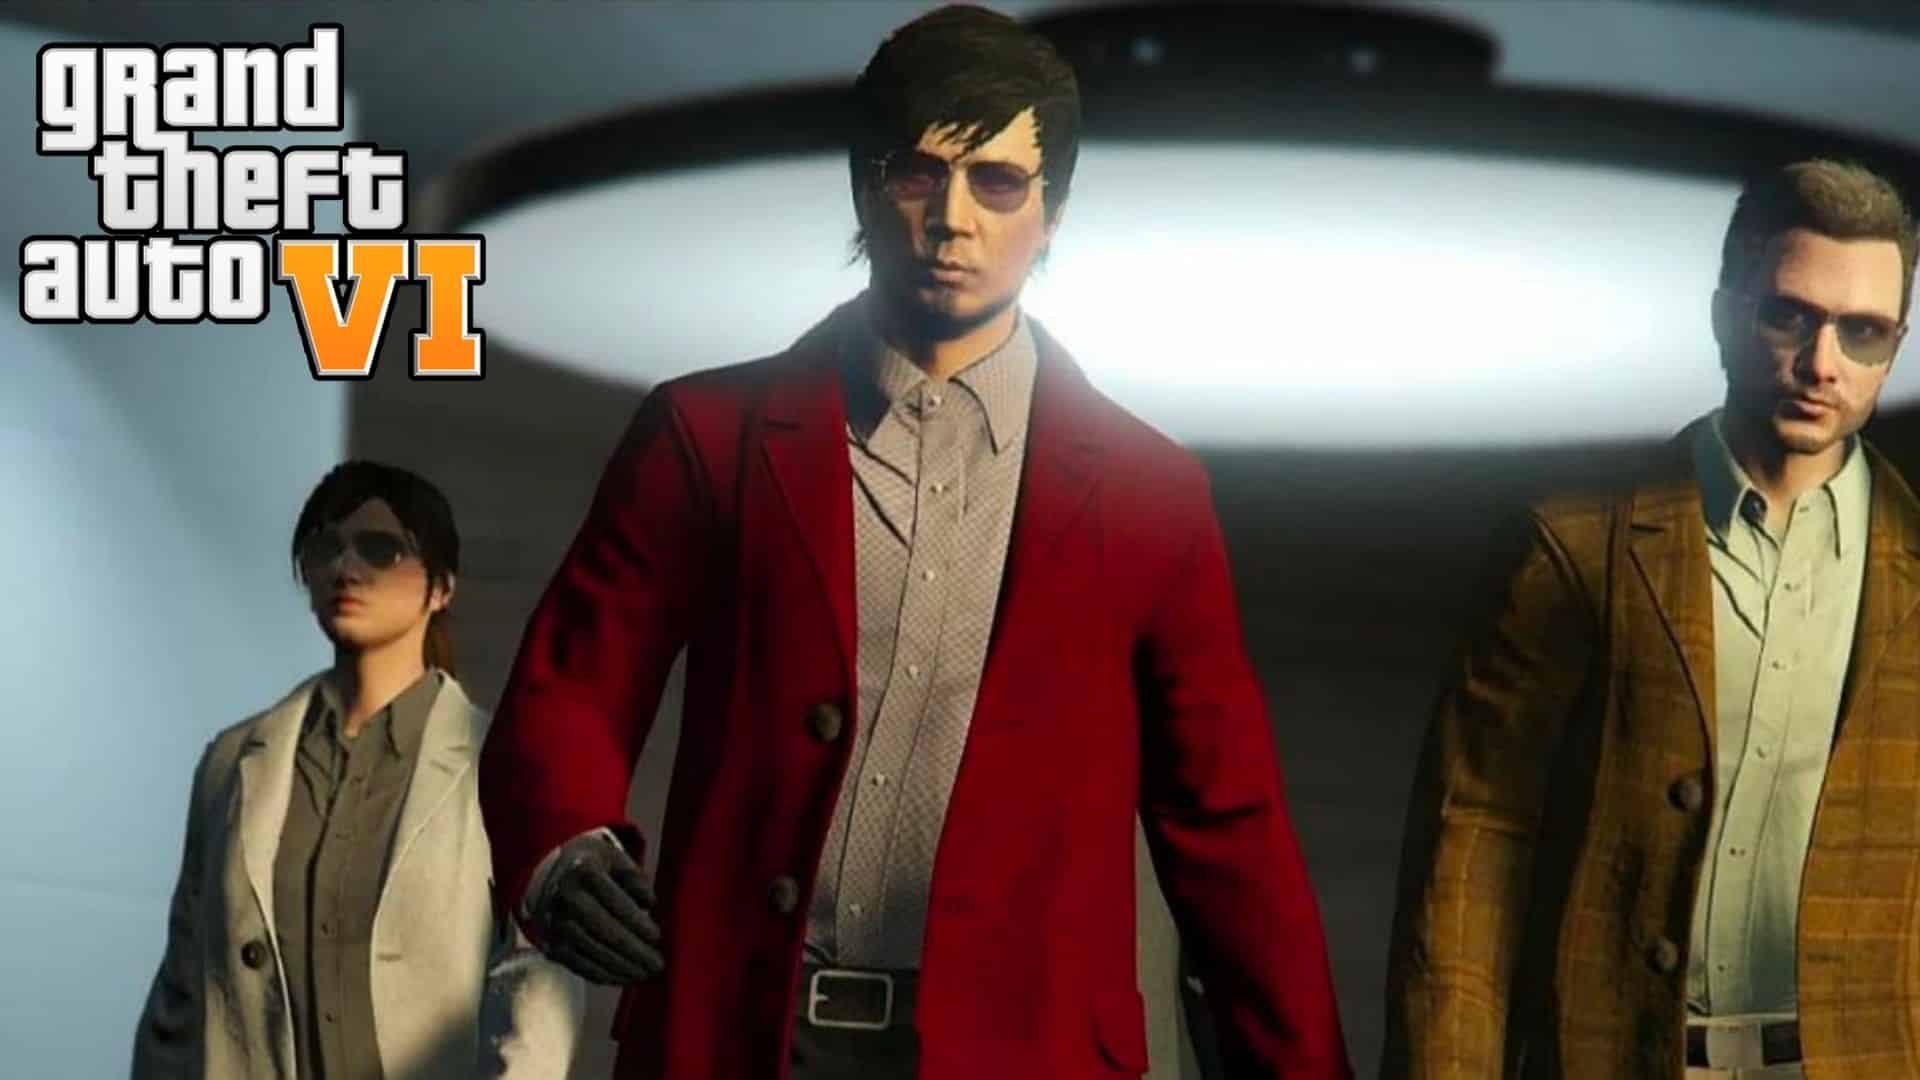 gta-6-leaker-claims-to-reveals-characters-and-story-details-3761203